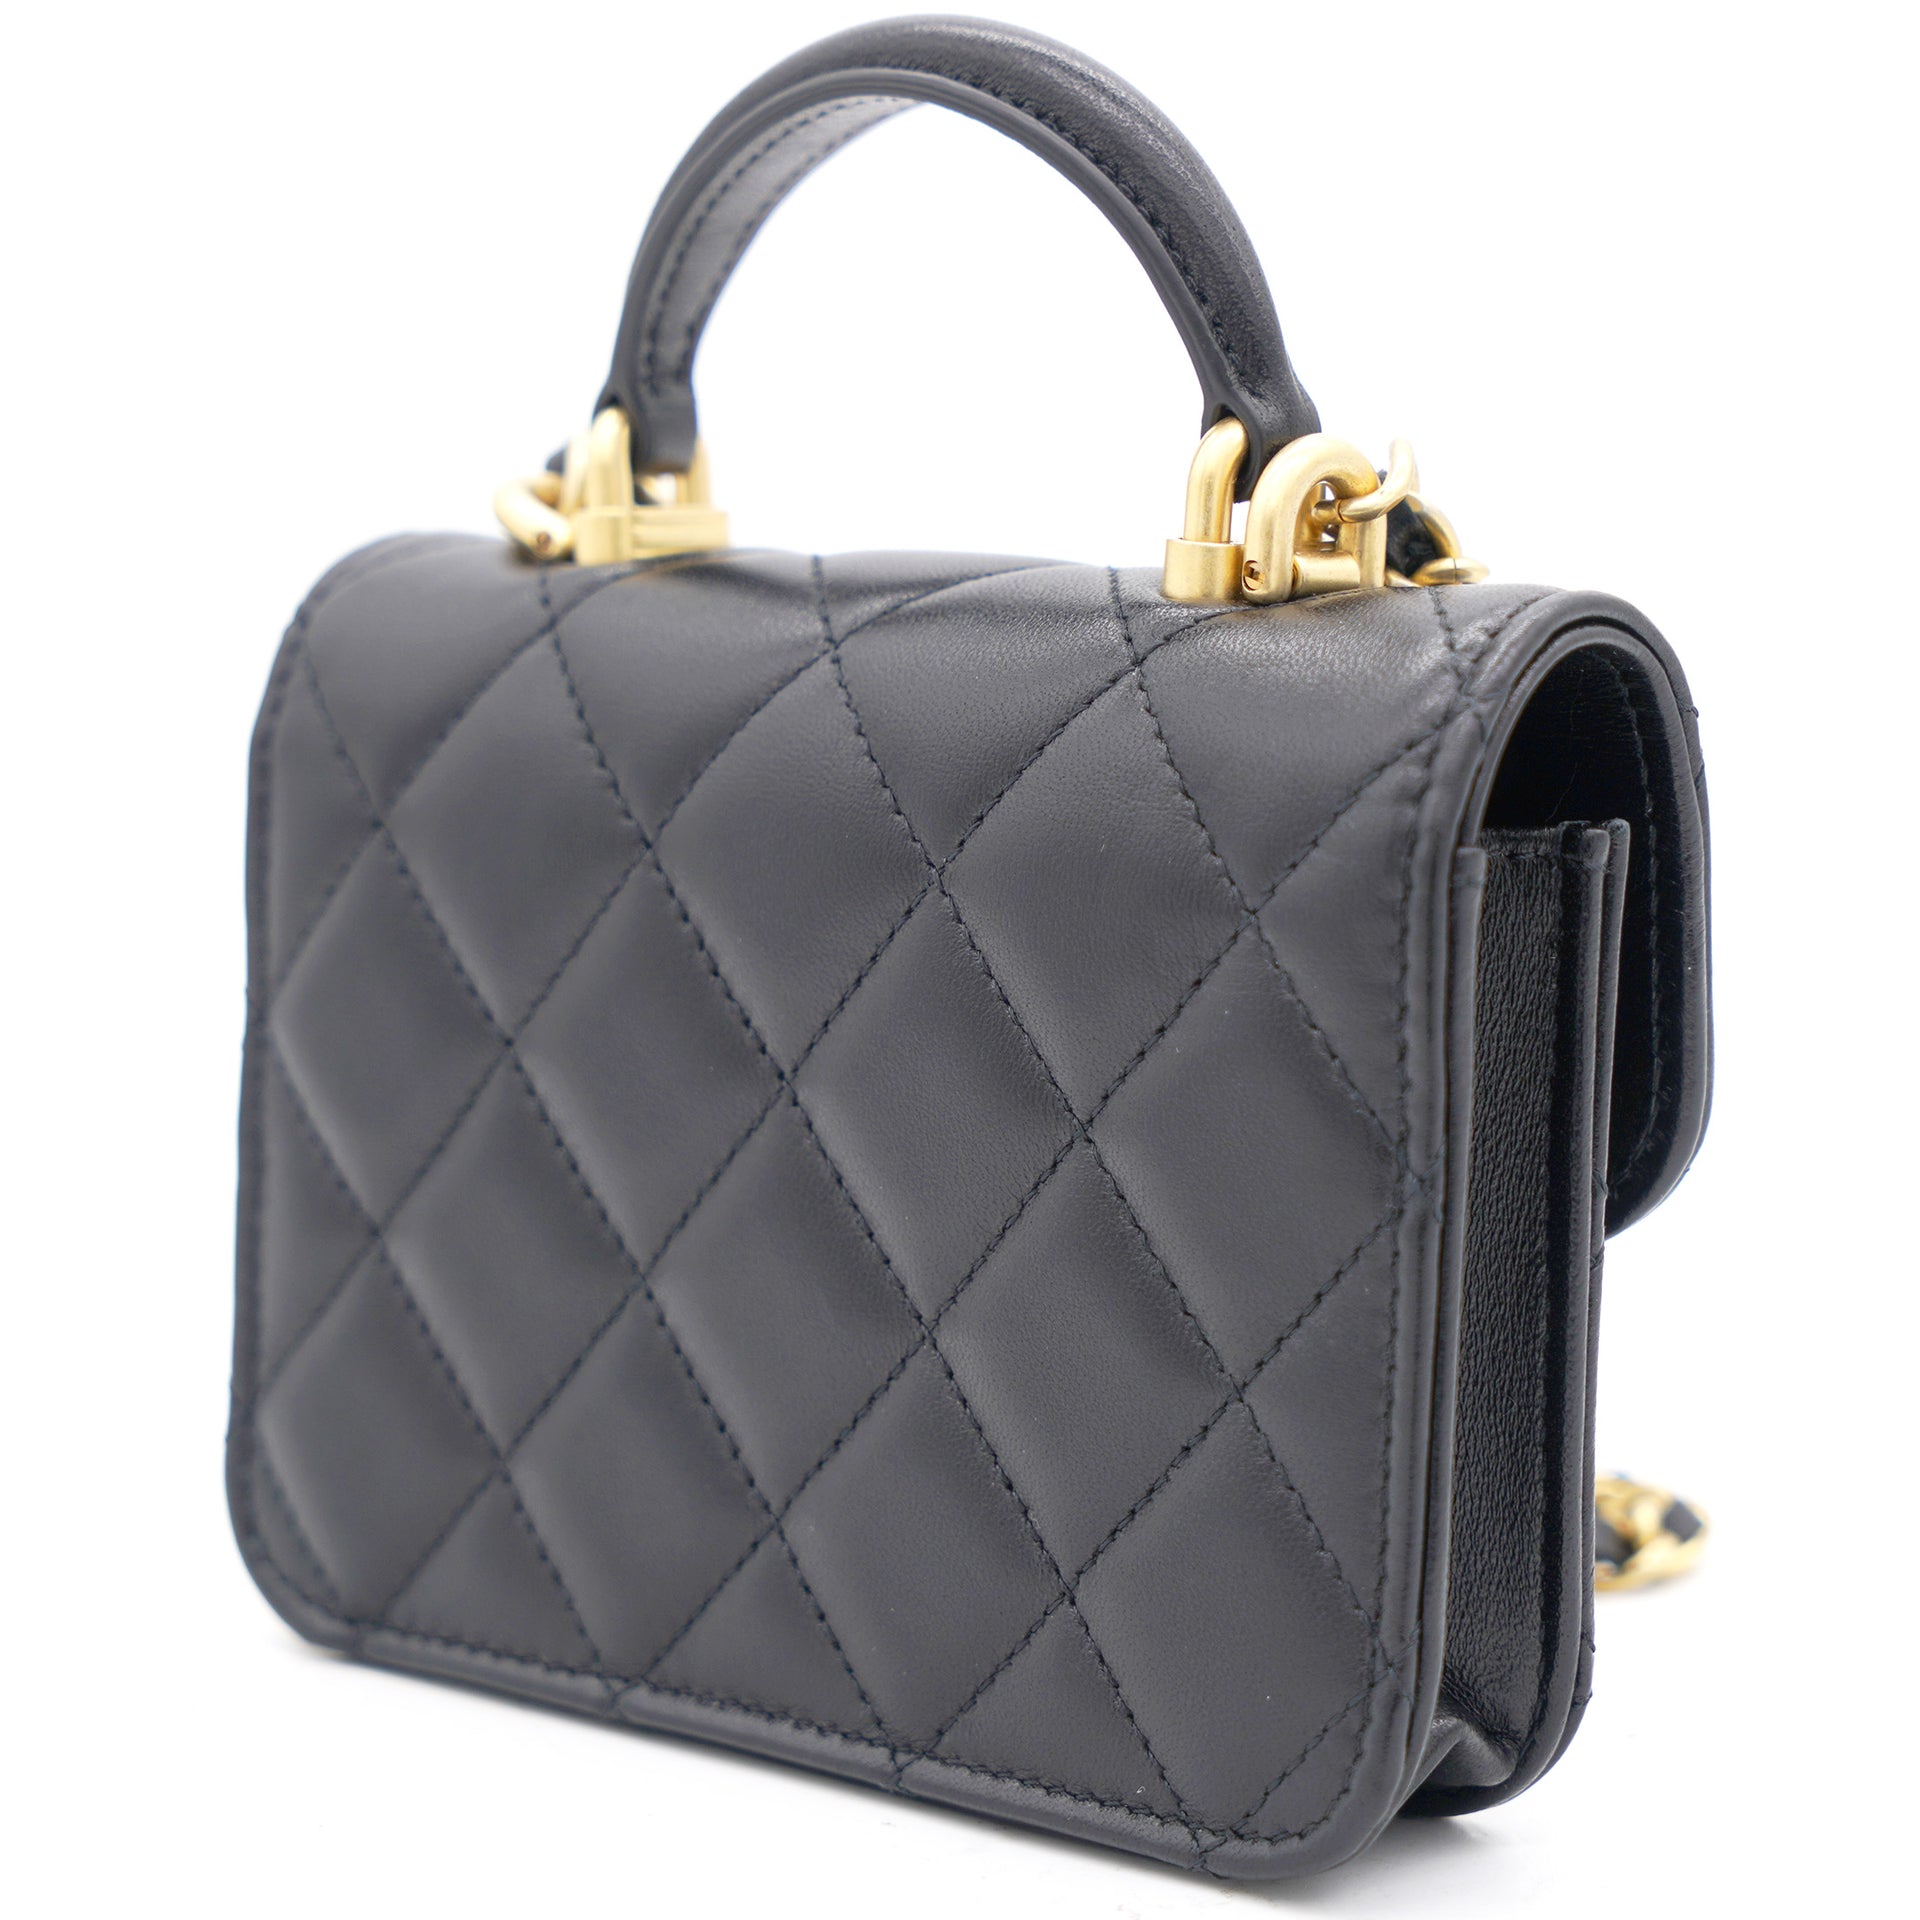 Black Caviar Quilted Leather Vanity Case Top Handle Bag – STYLISHTOP